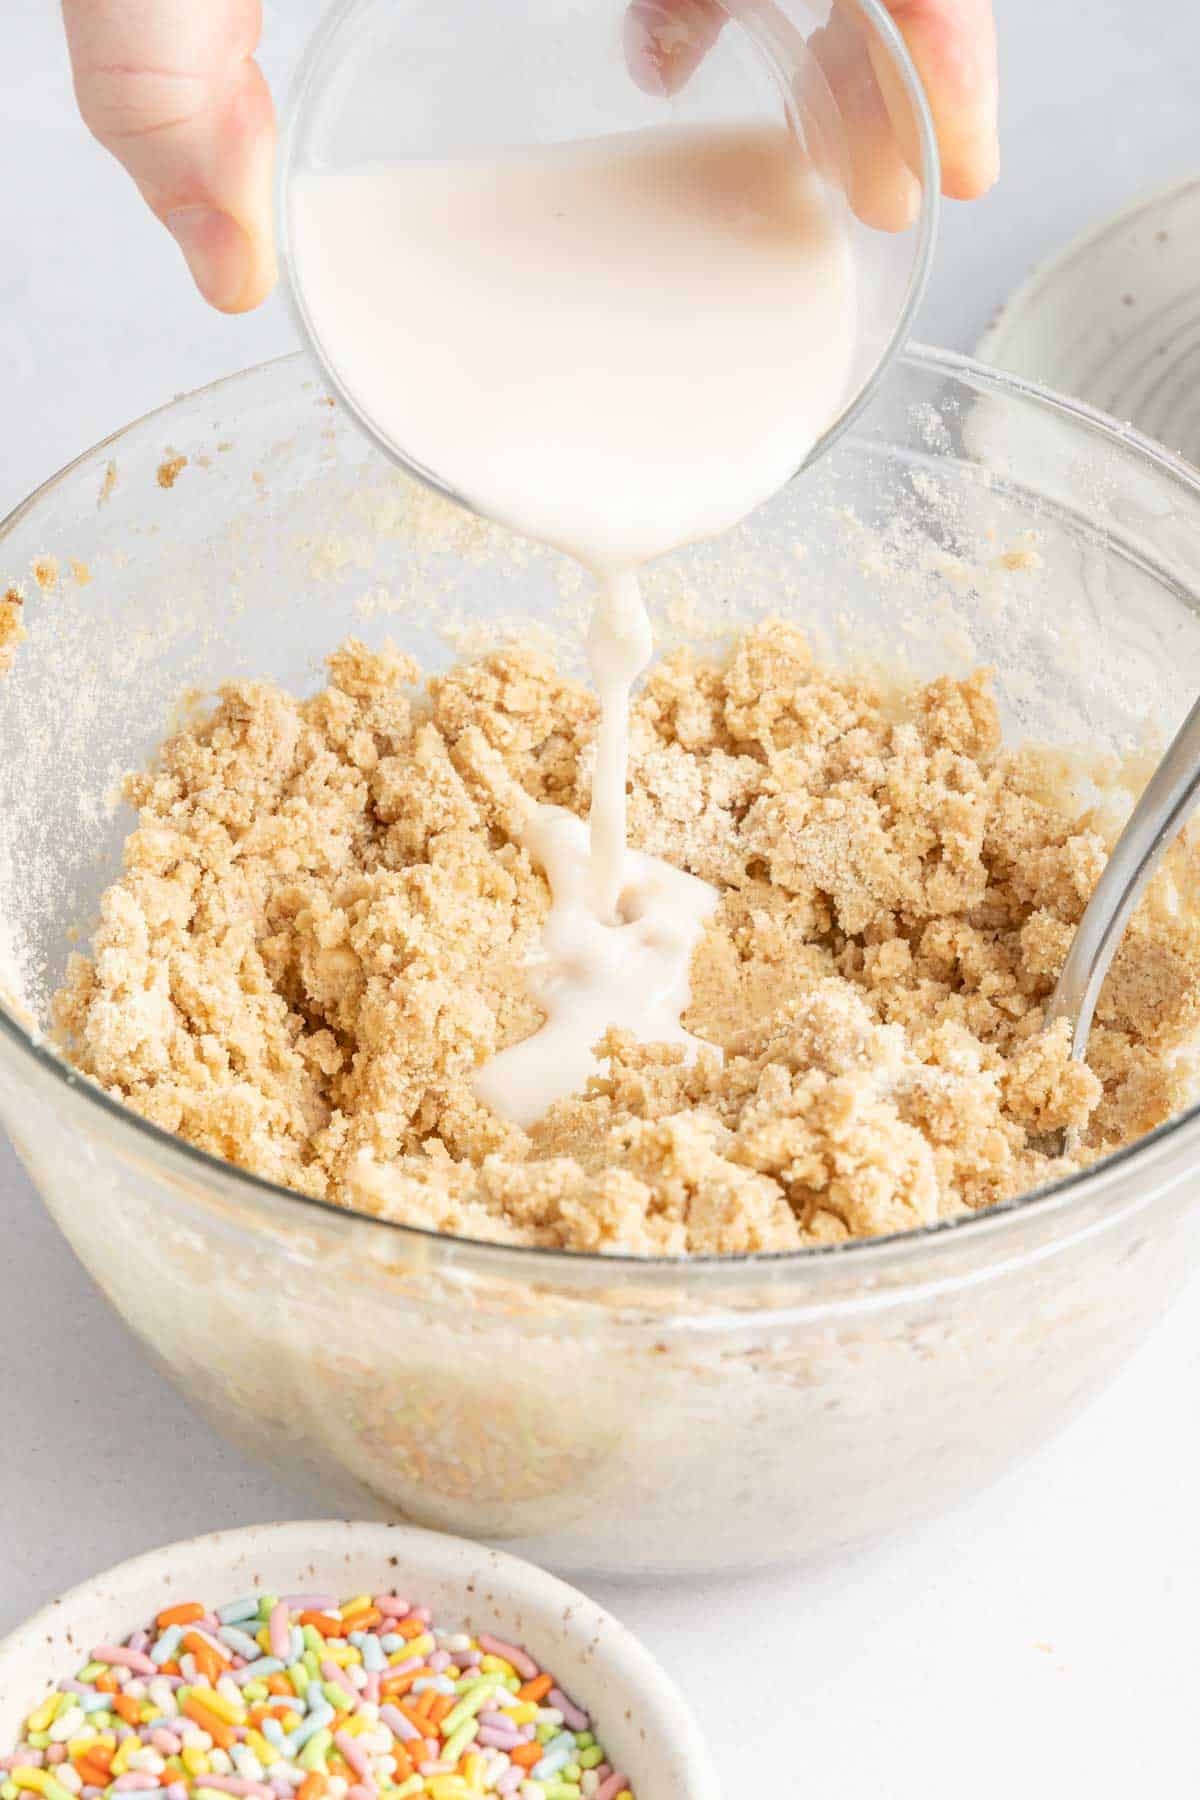 A hand pours milk into a glass bowl of mixed cookie dough.